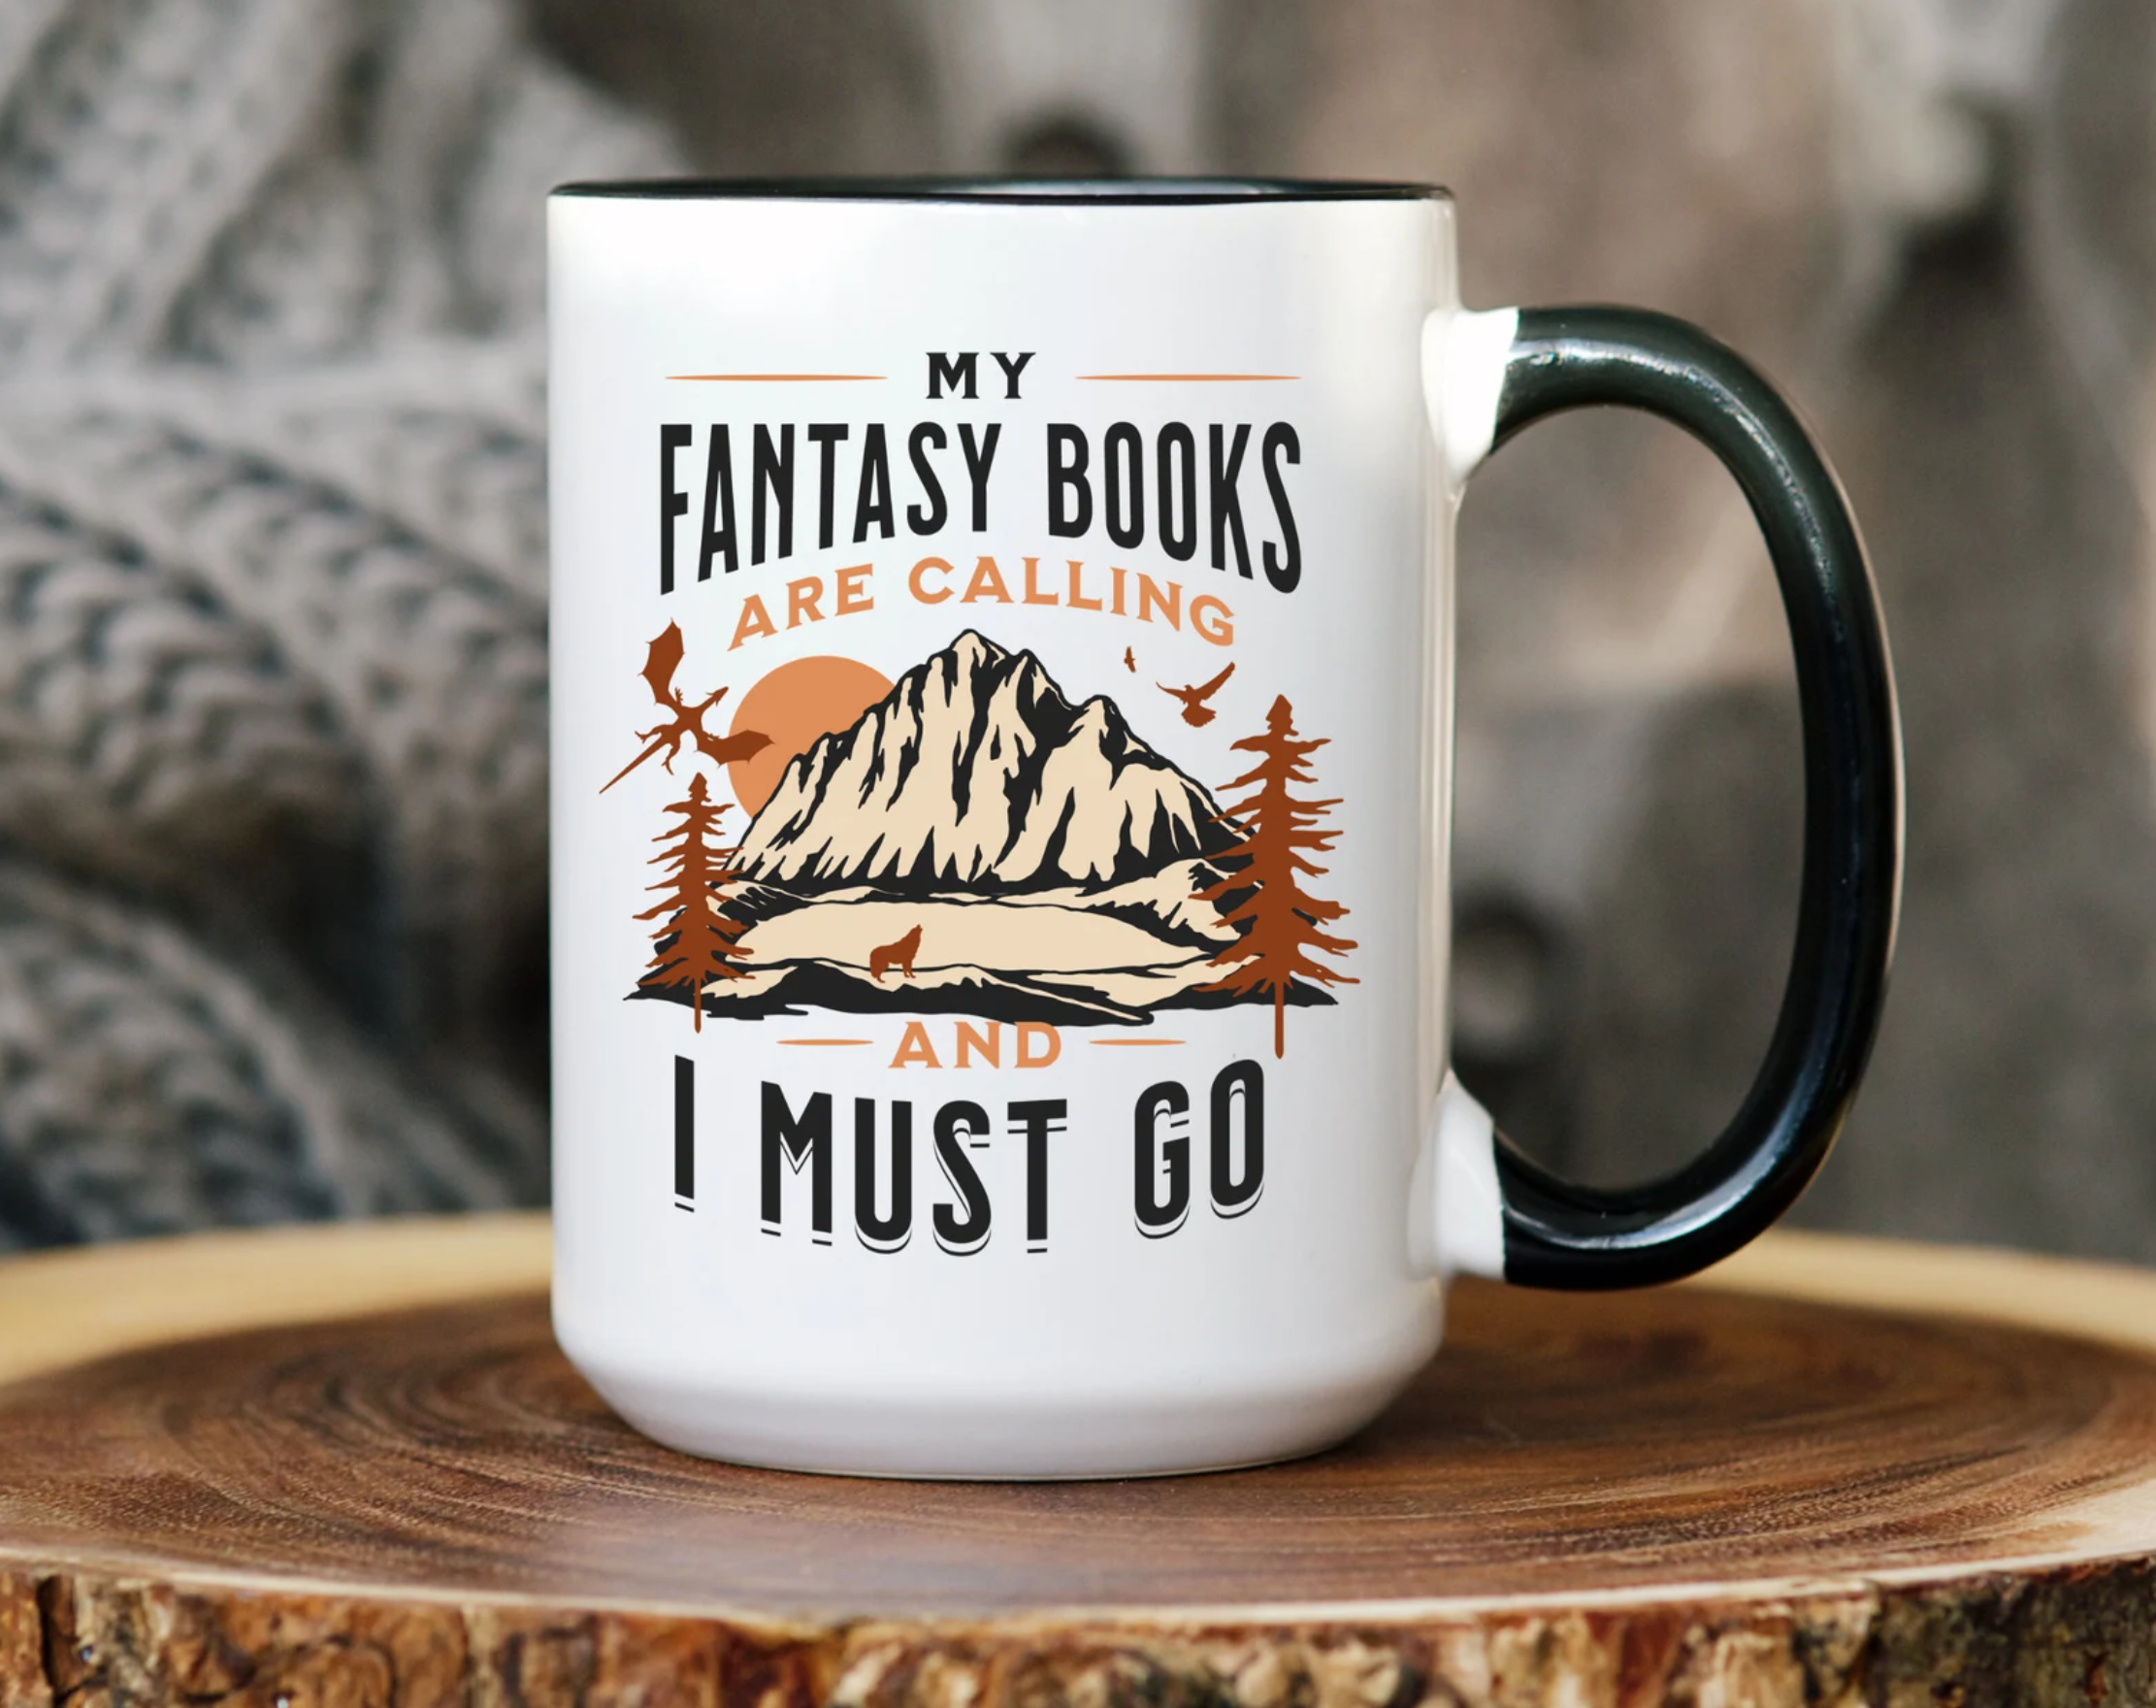 White mug with black handle and an illustration of mountains that says "My fantasy books are calling and I must go."